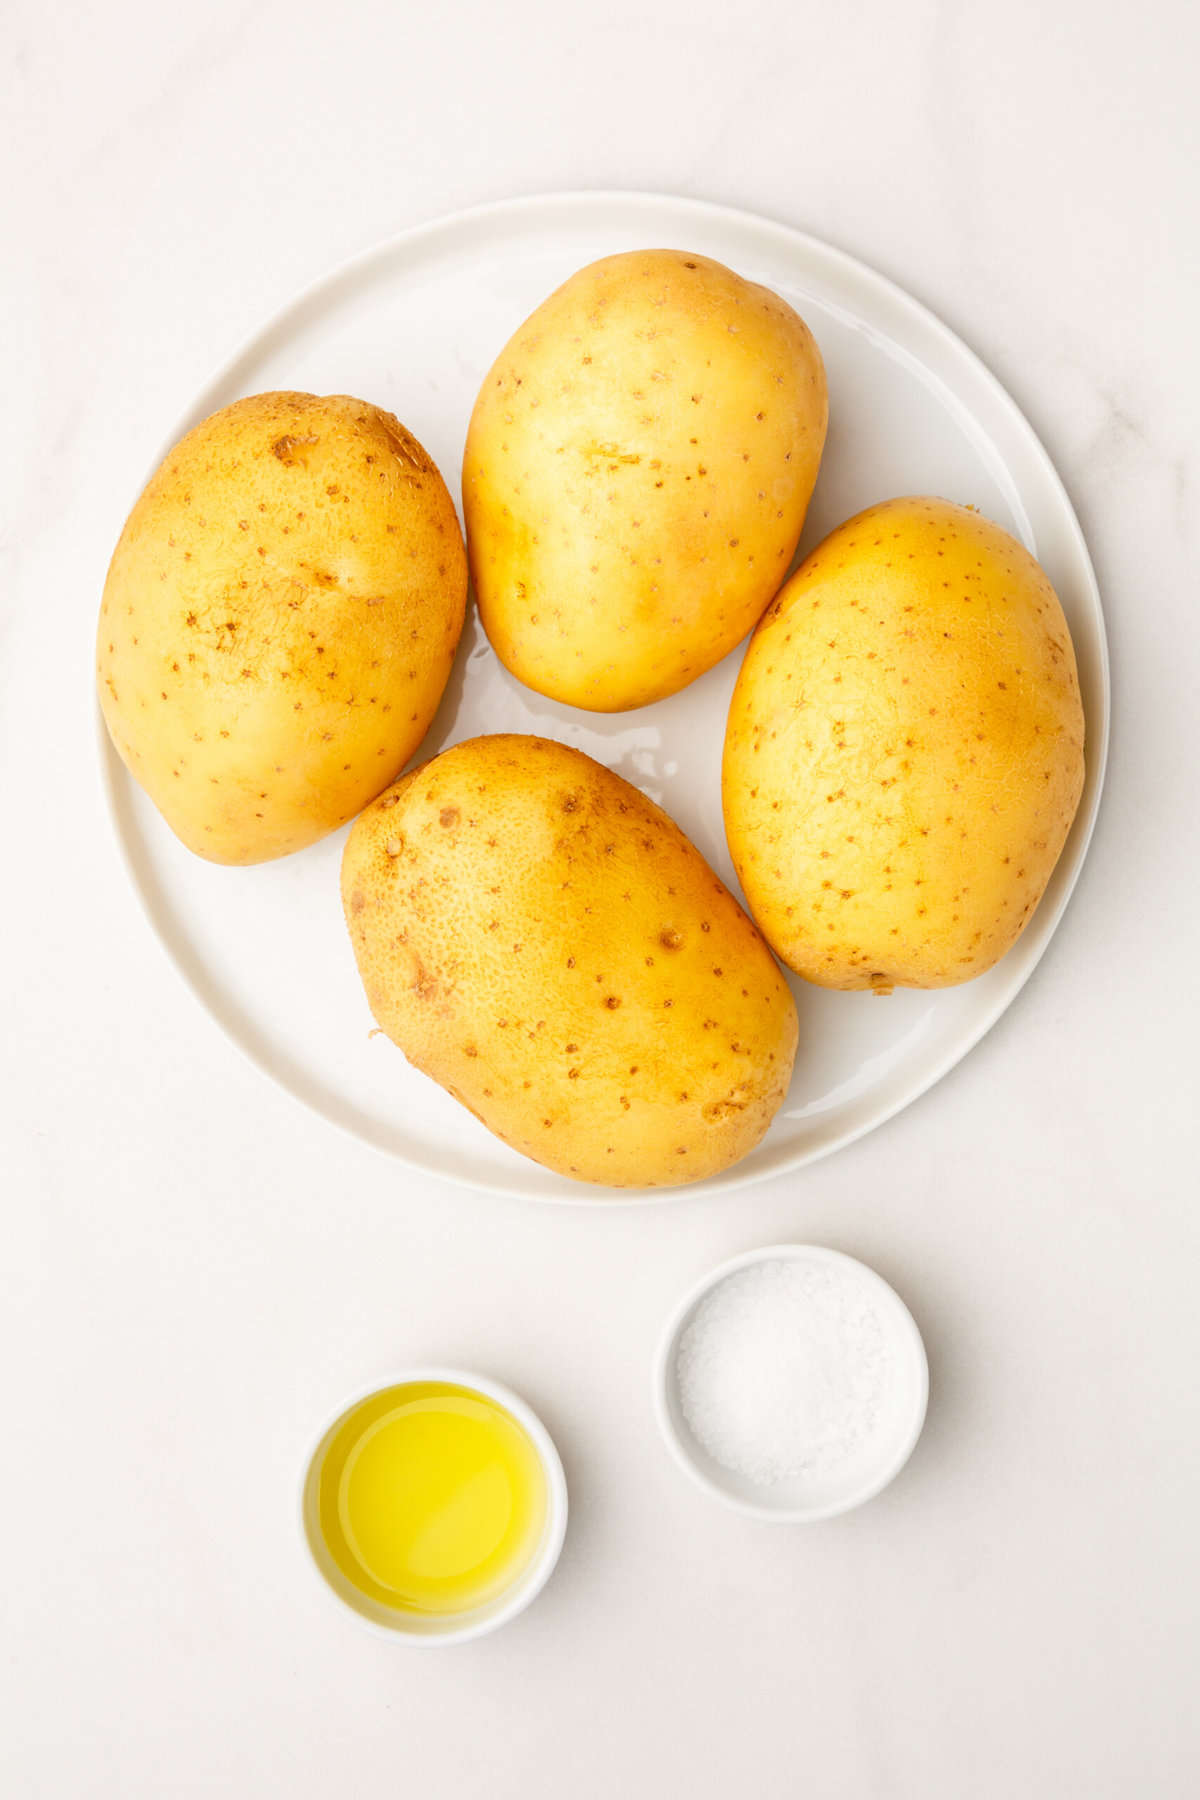 ingredients to make perfectly baked potatoes